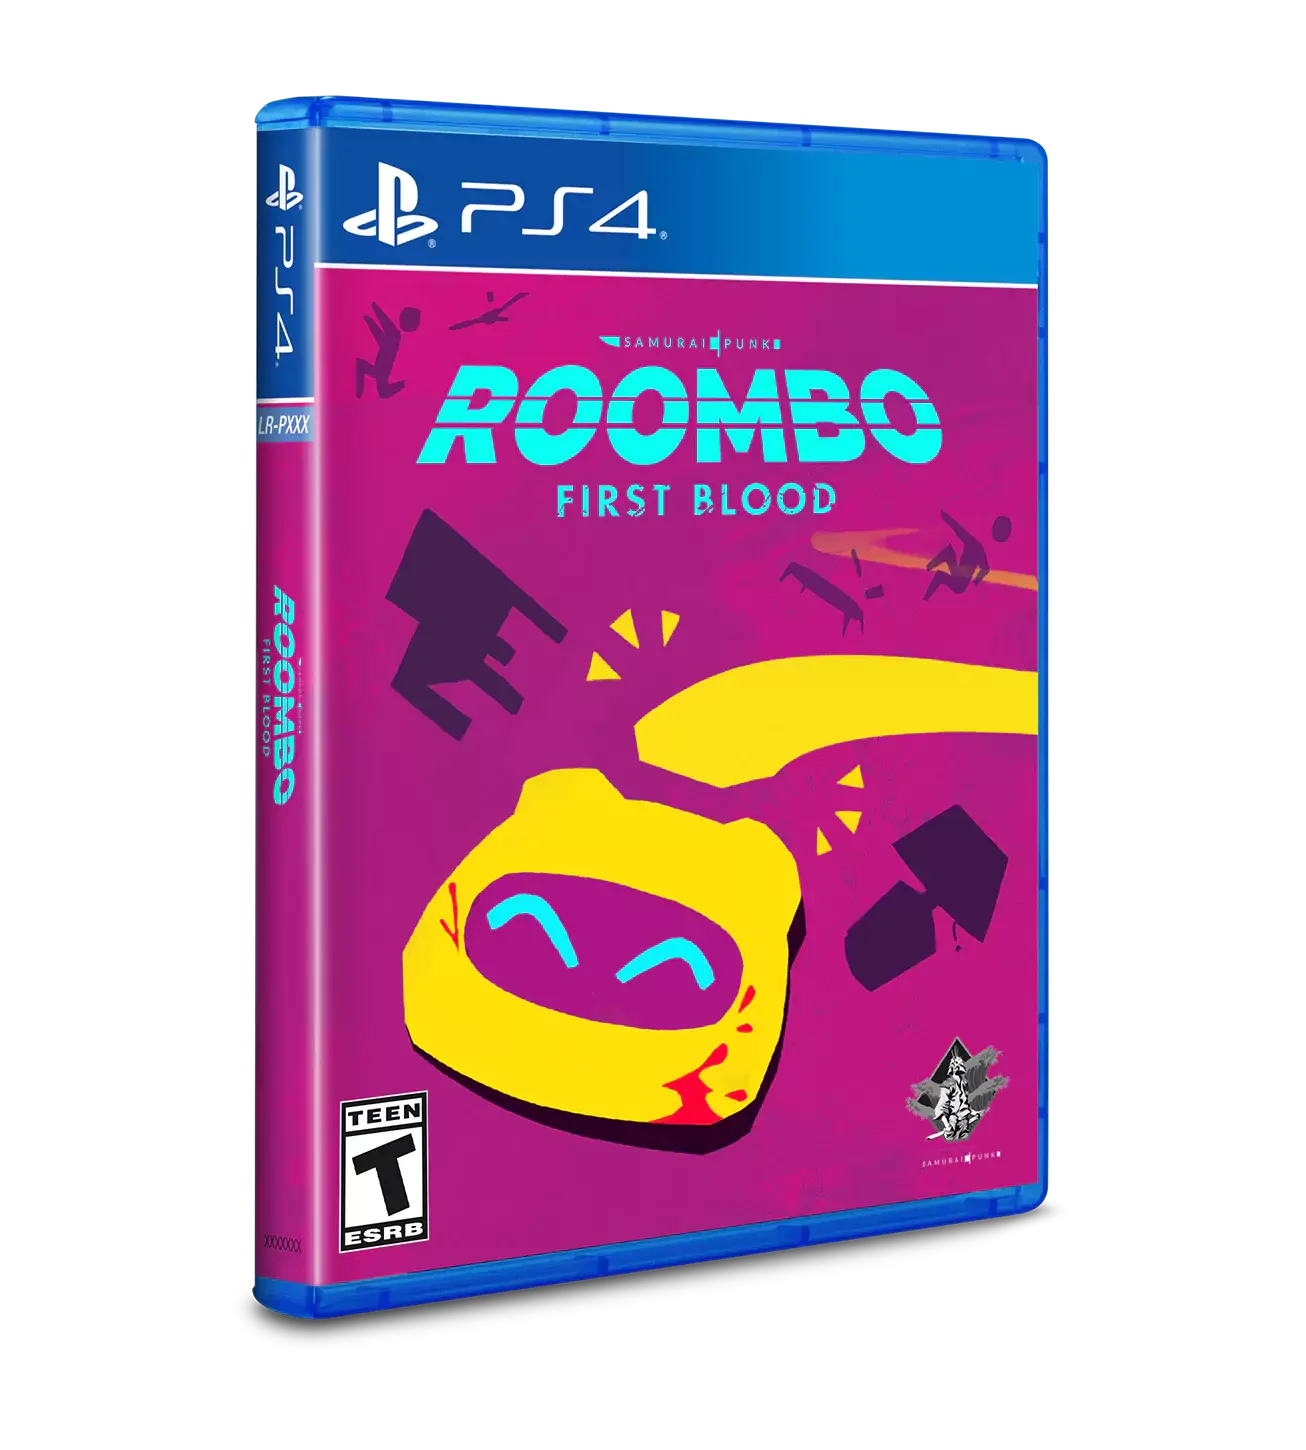 PS4 Games - Roombo: First Blood